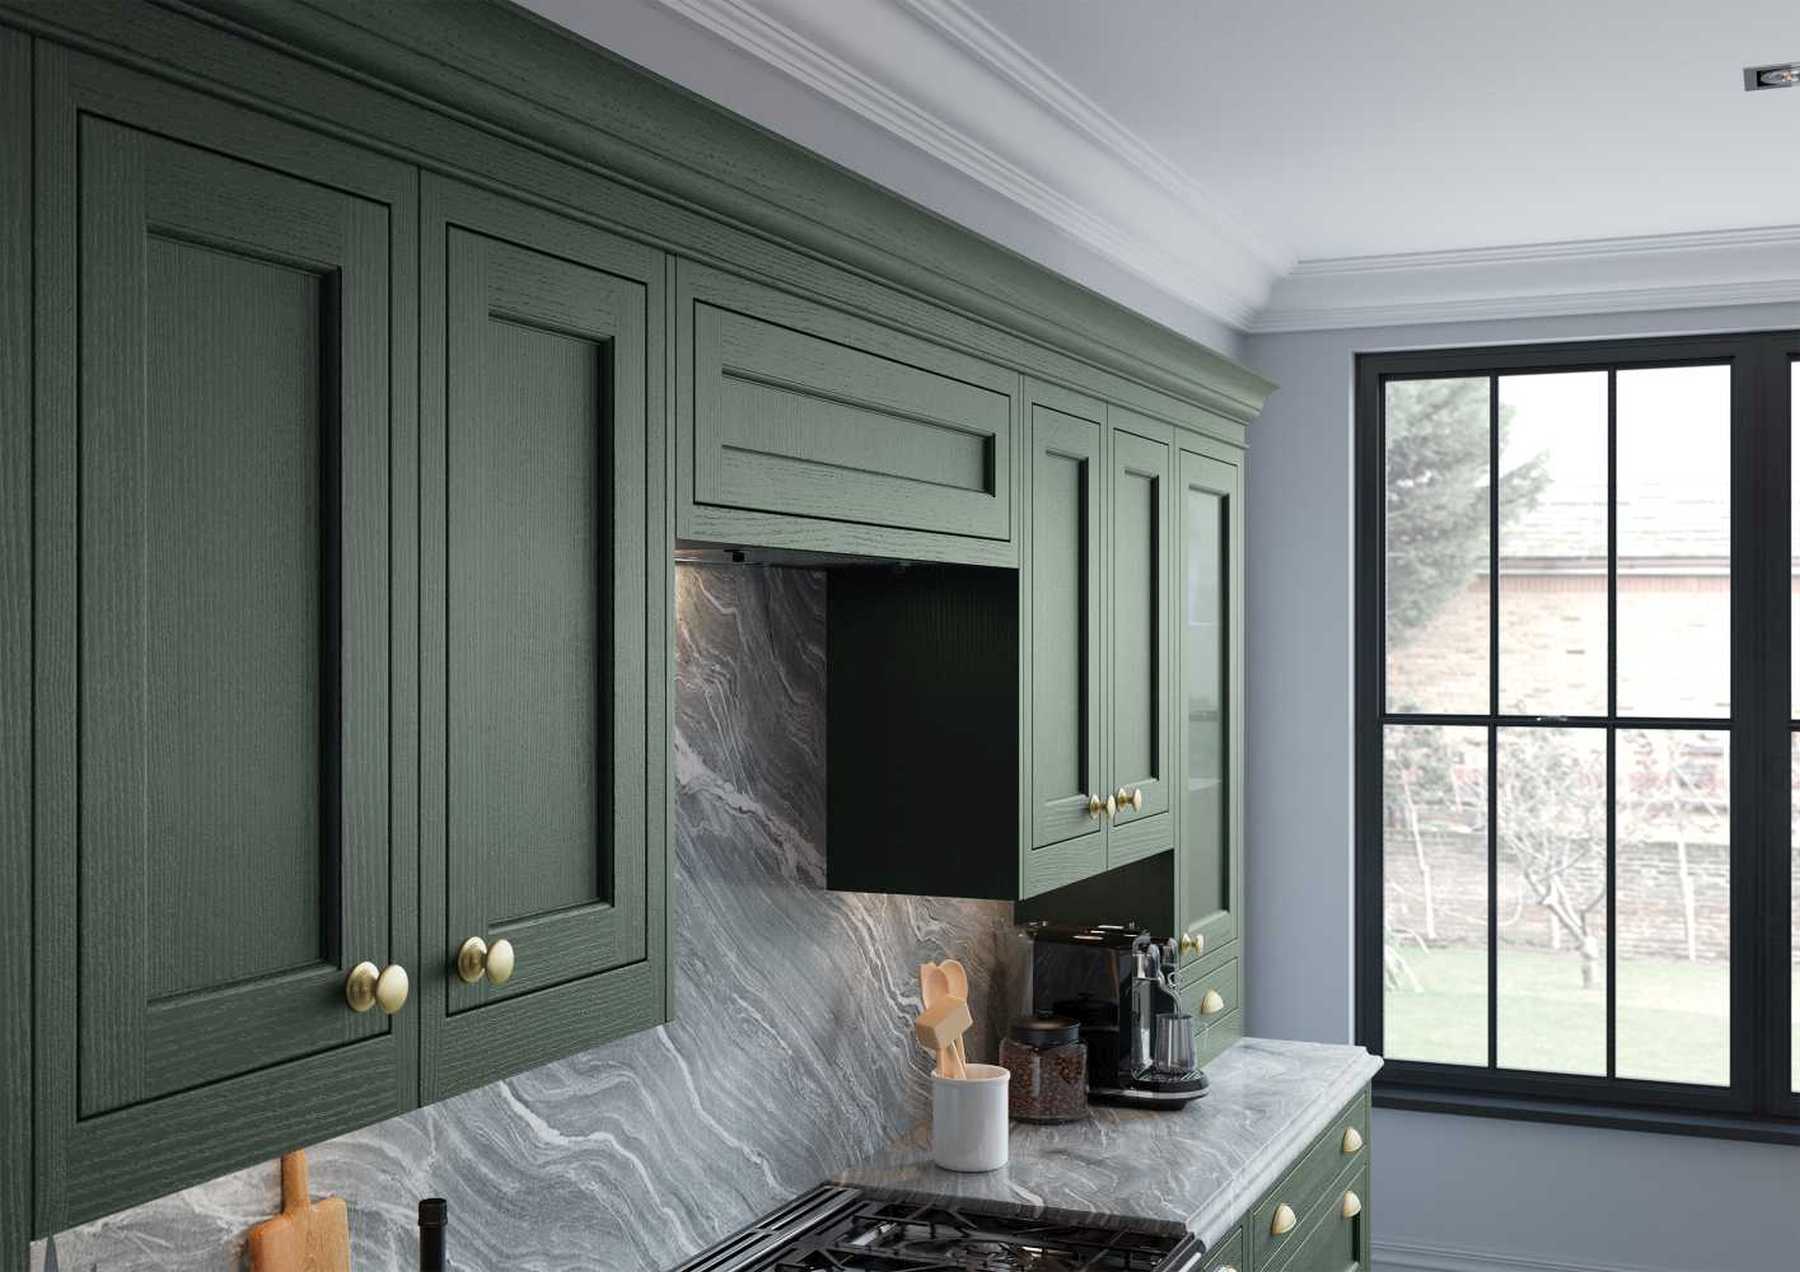 Luxurious inframe kitchen in forest green wall units